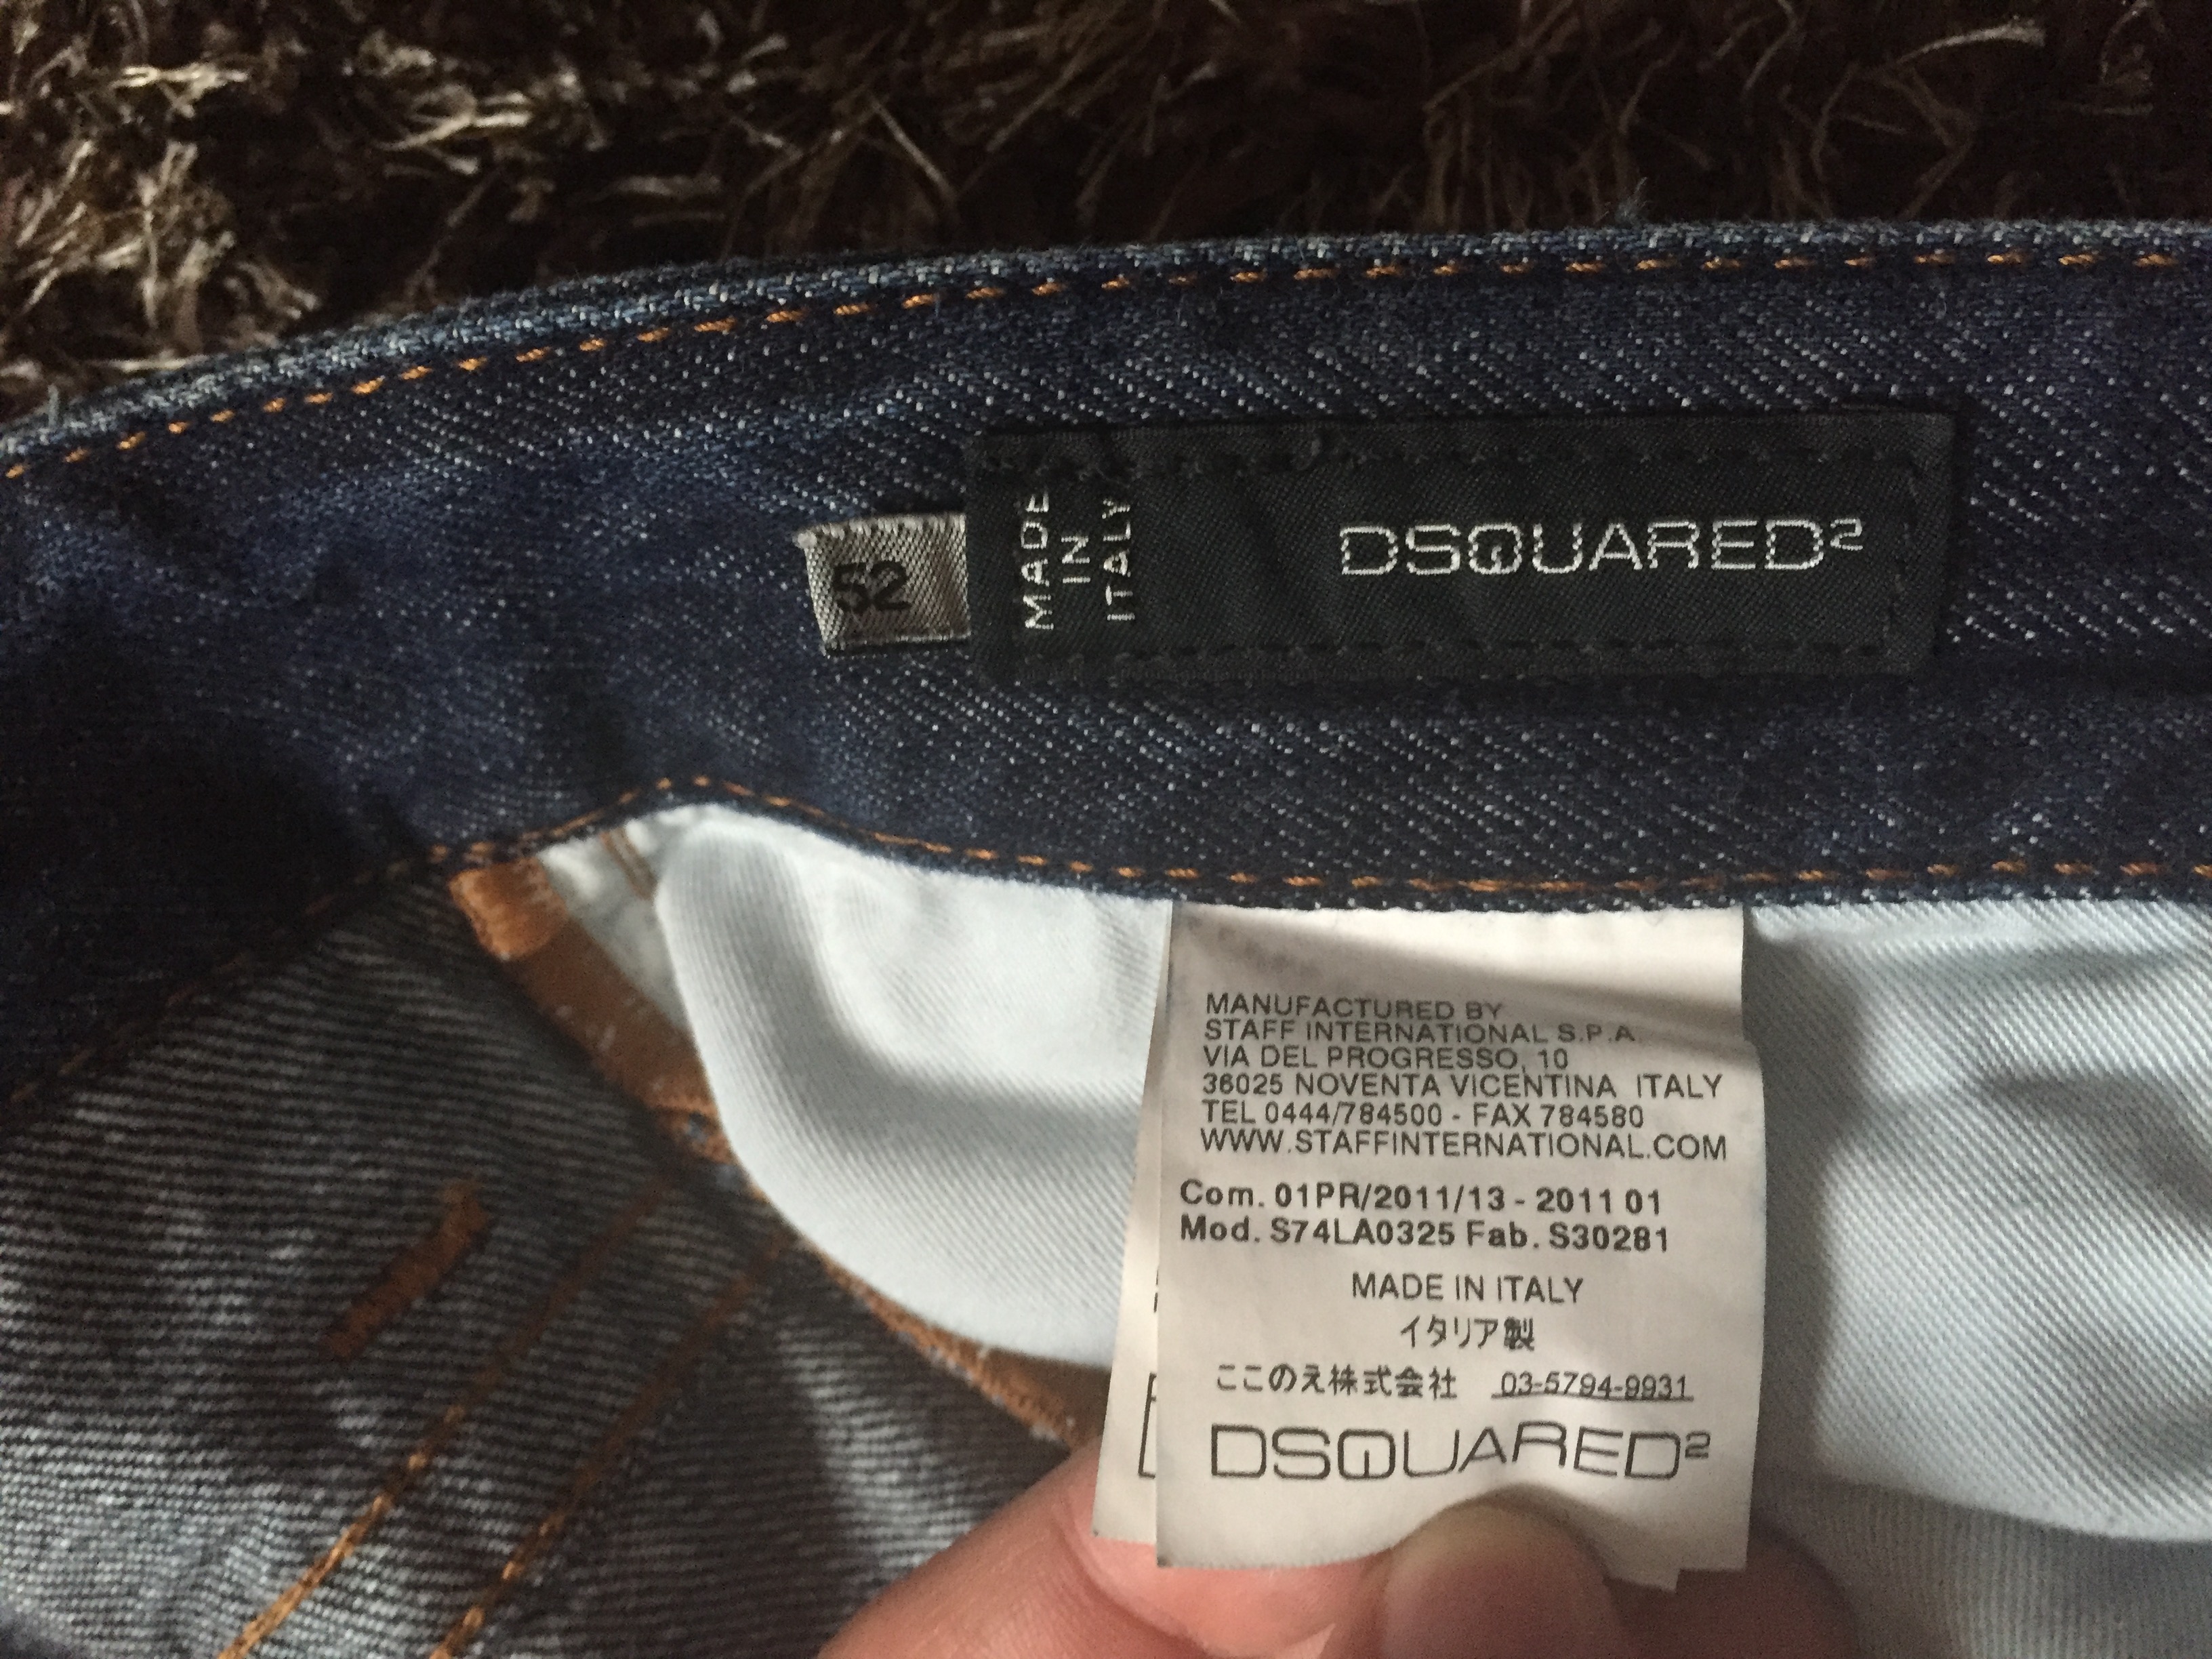 Dsquared jeans - real fake, pls ! - The eBay Community